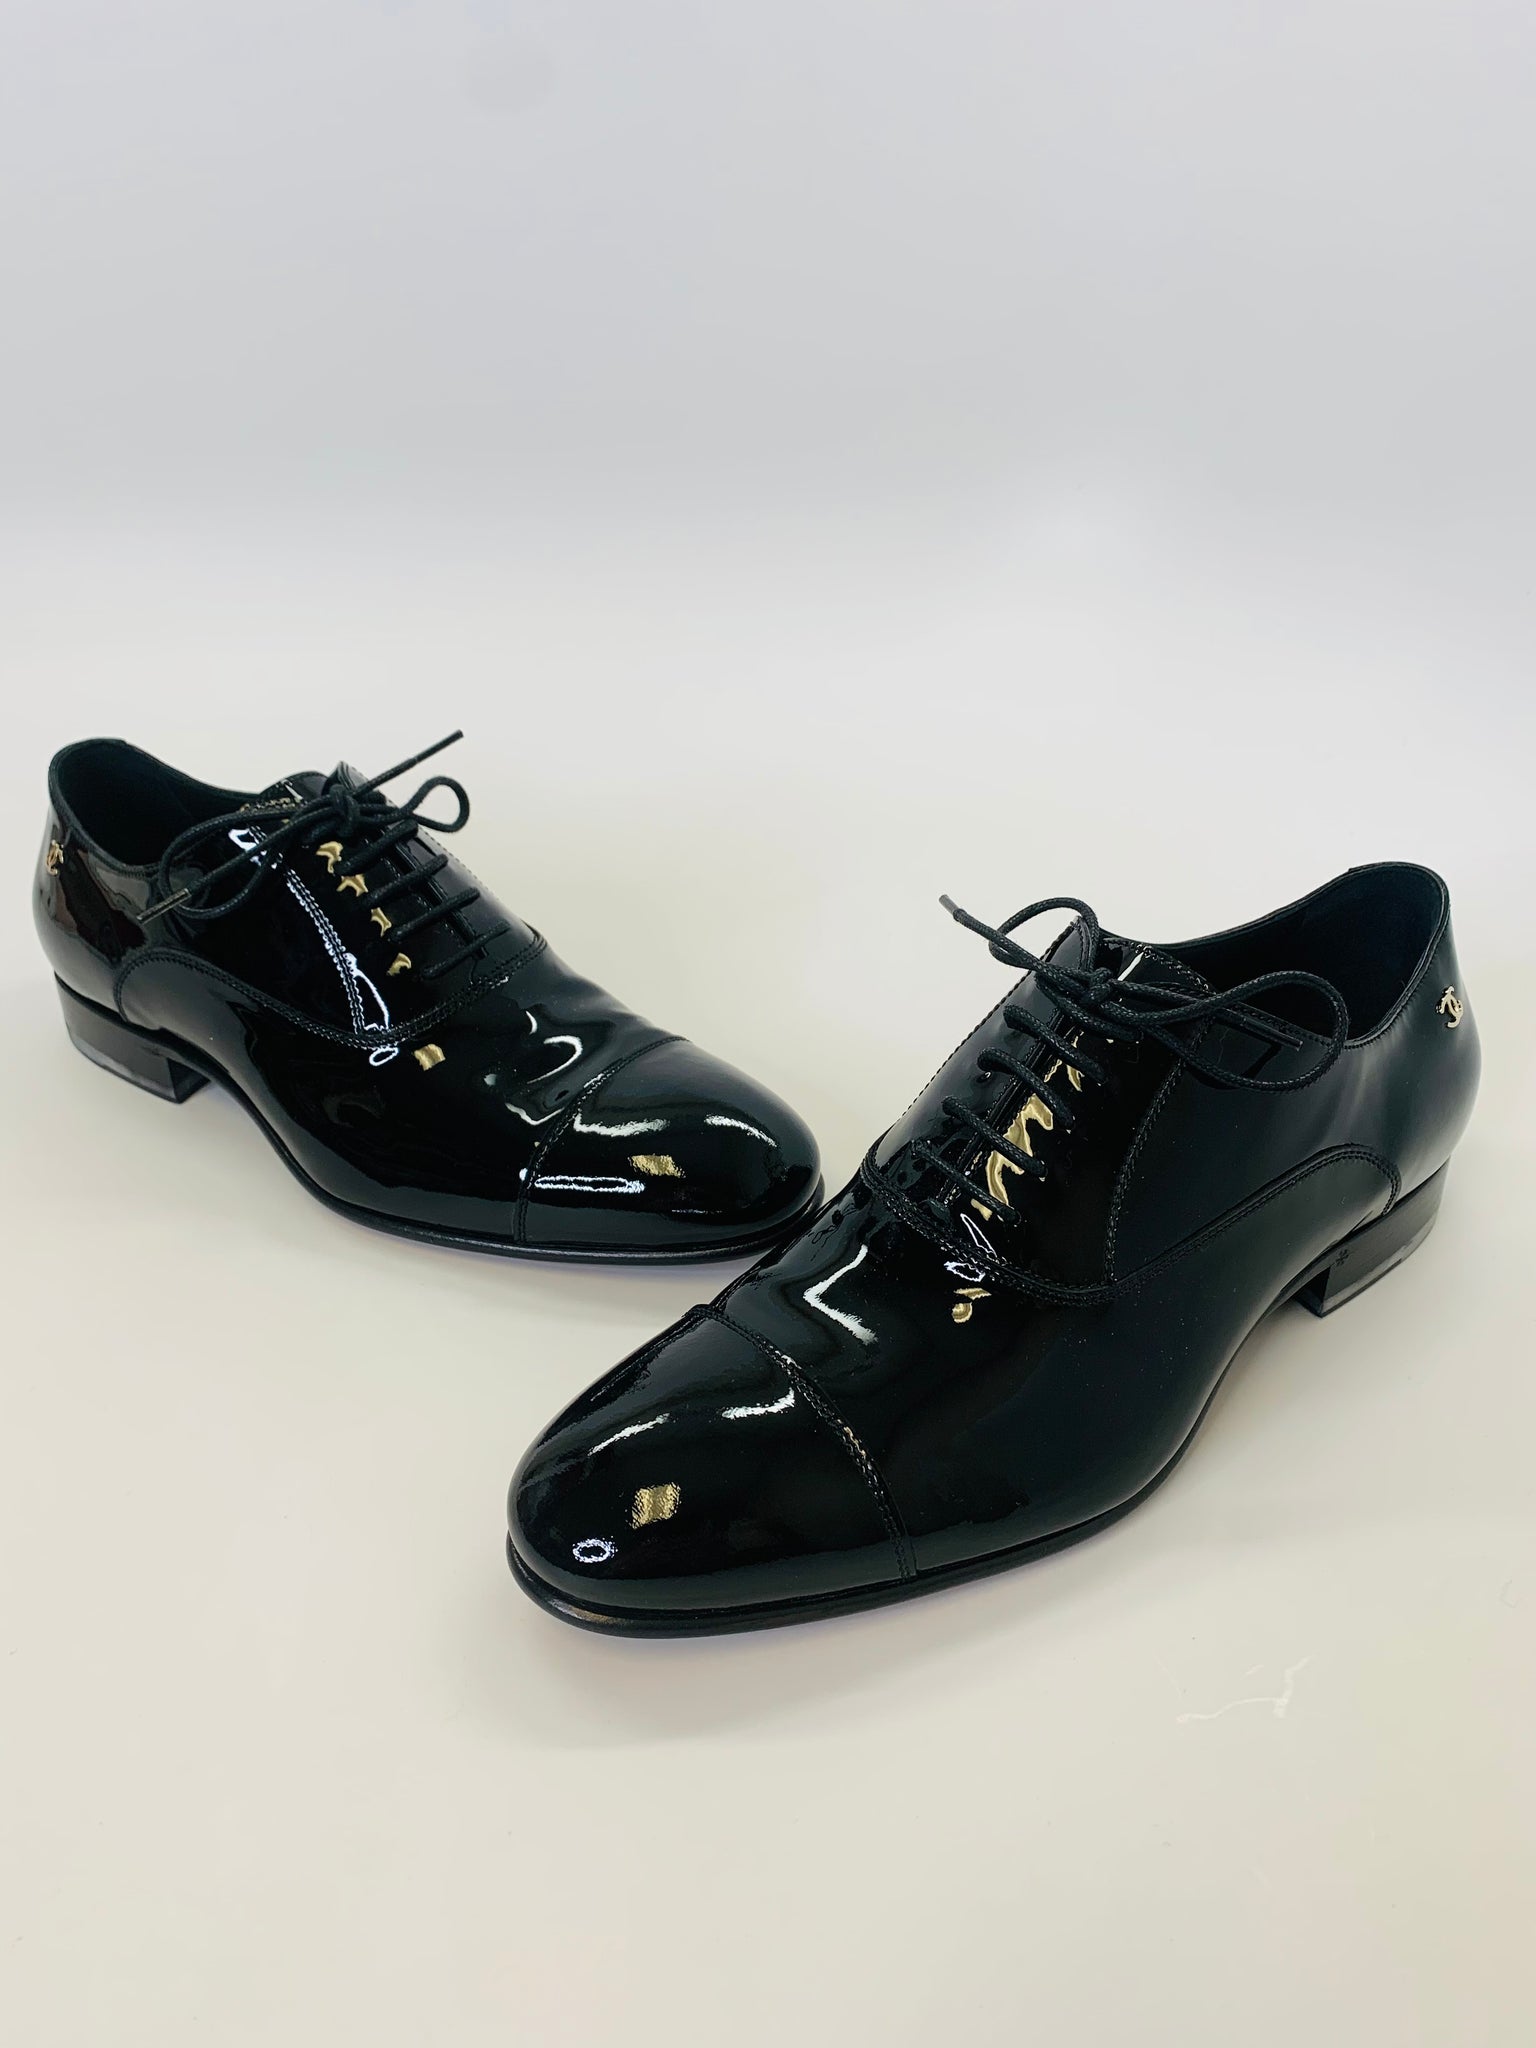 CHANEL Black Lace Up Shoes Size 40 – JDEX Styles